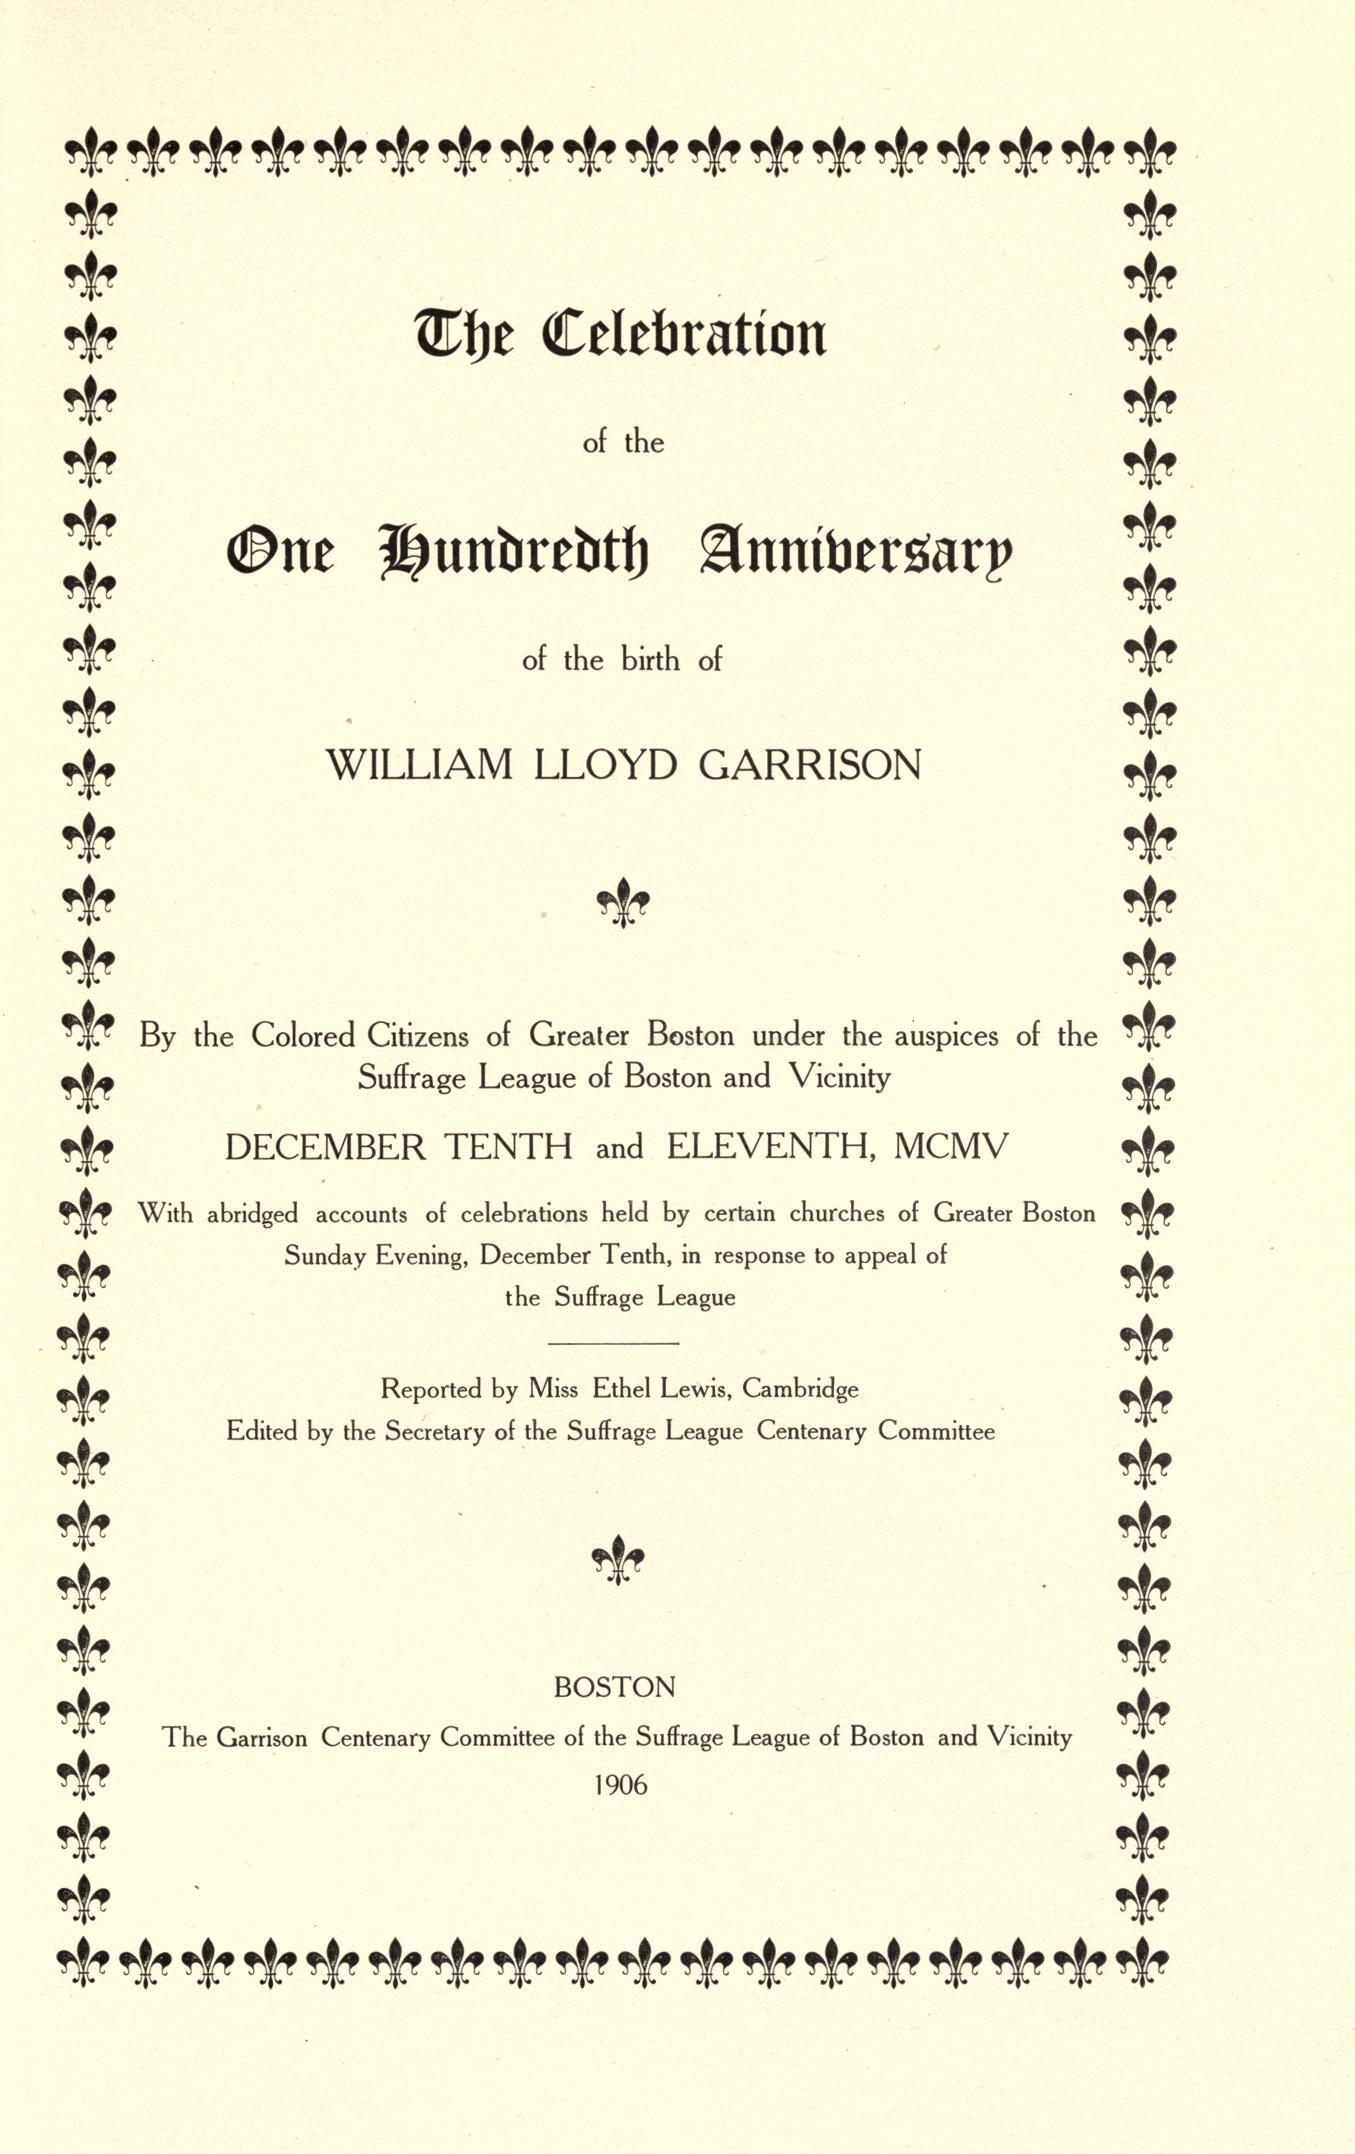 Title page of a pamphlet for a 100th Birthday Celebration of William LLoyd Garrison